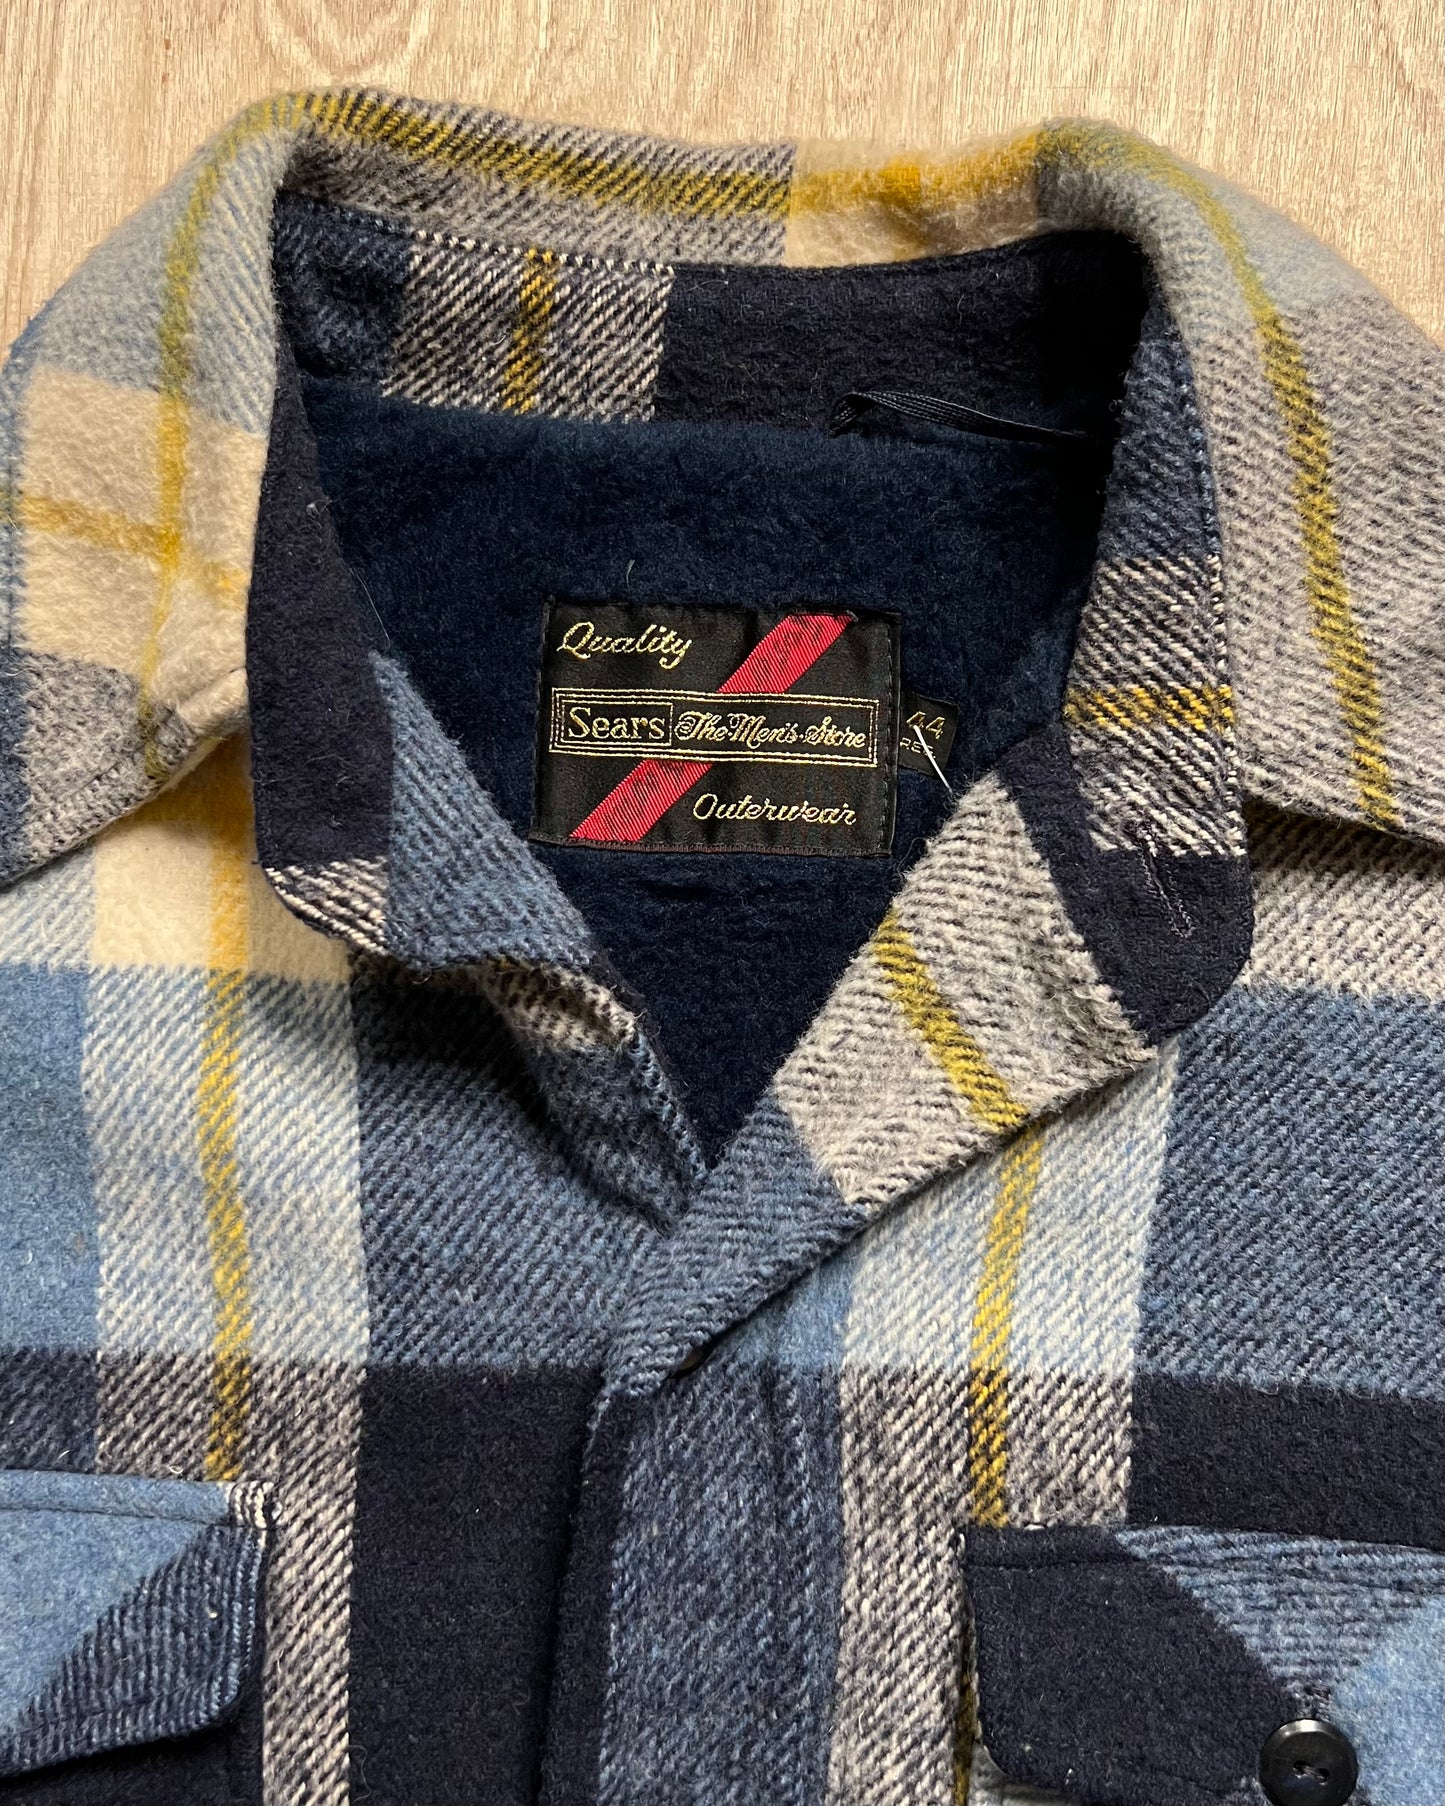 Vintage Sears "The Men's Store" Insulated Flannel Jacket